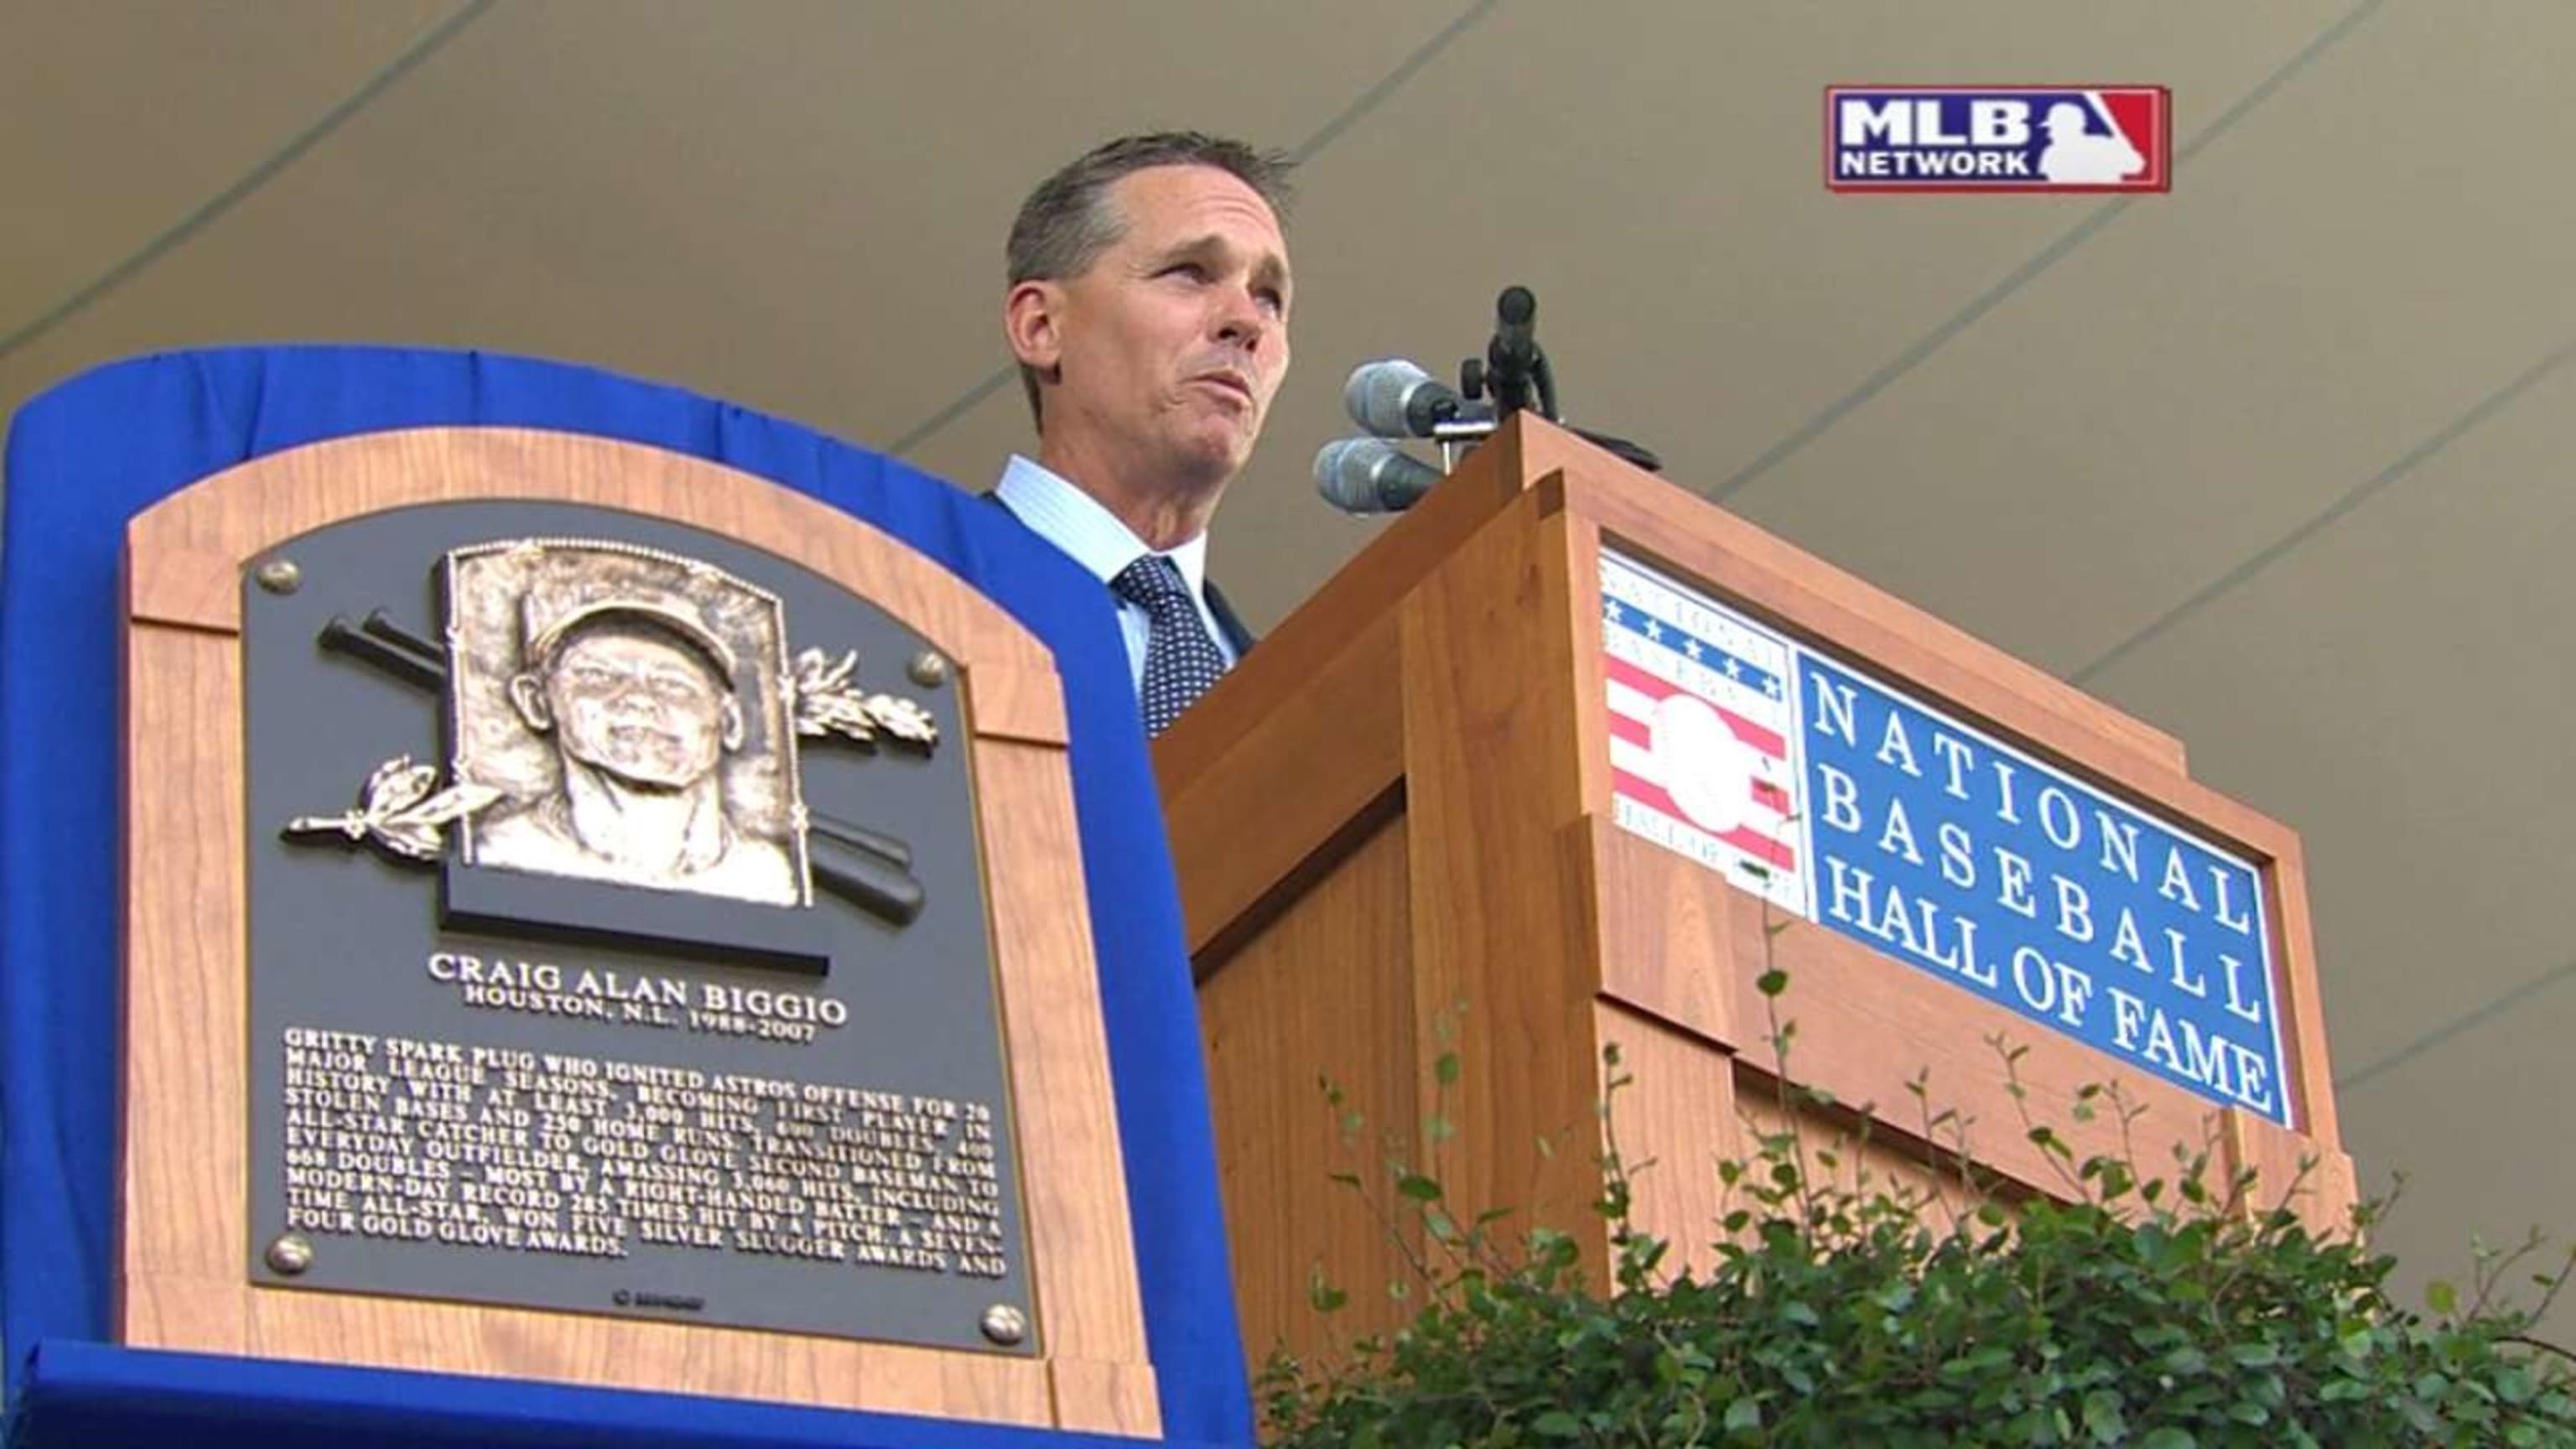 Could Craig Biggio have made Hall of Fame as Cardinal?